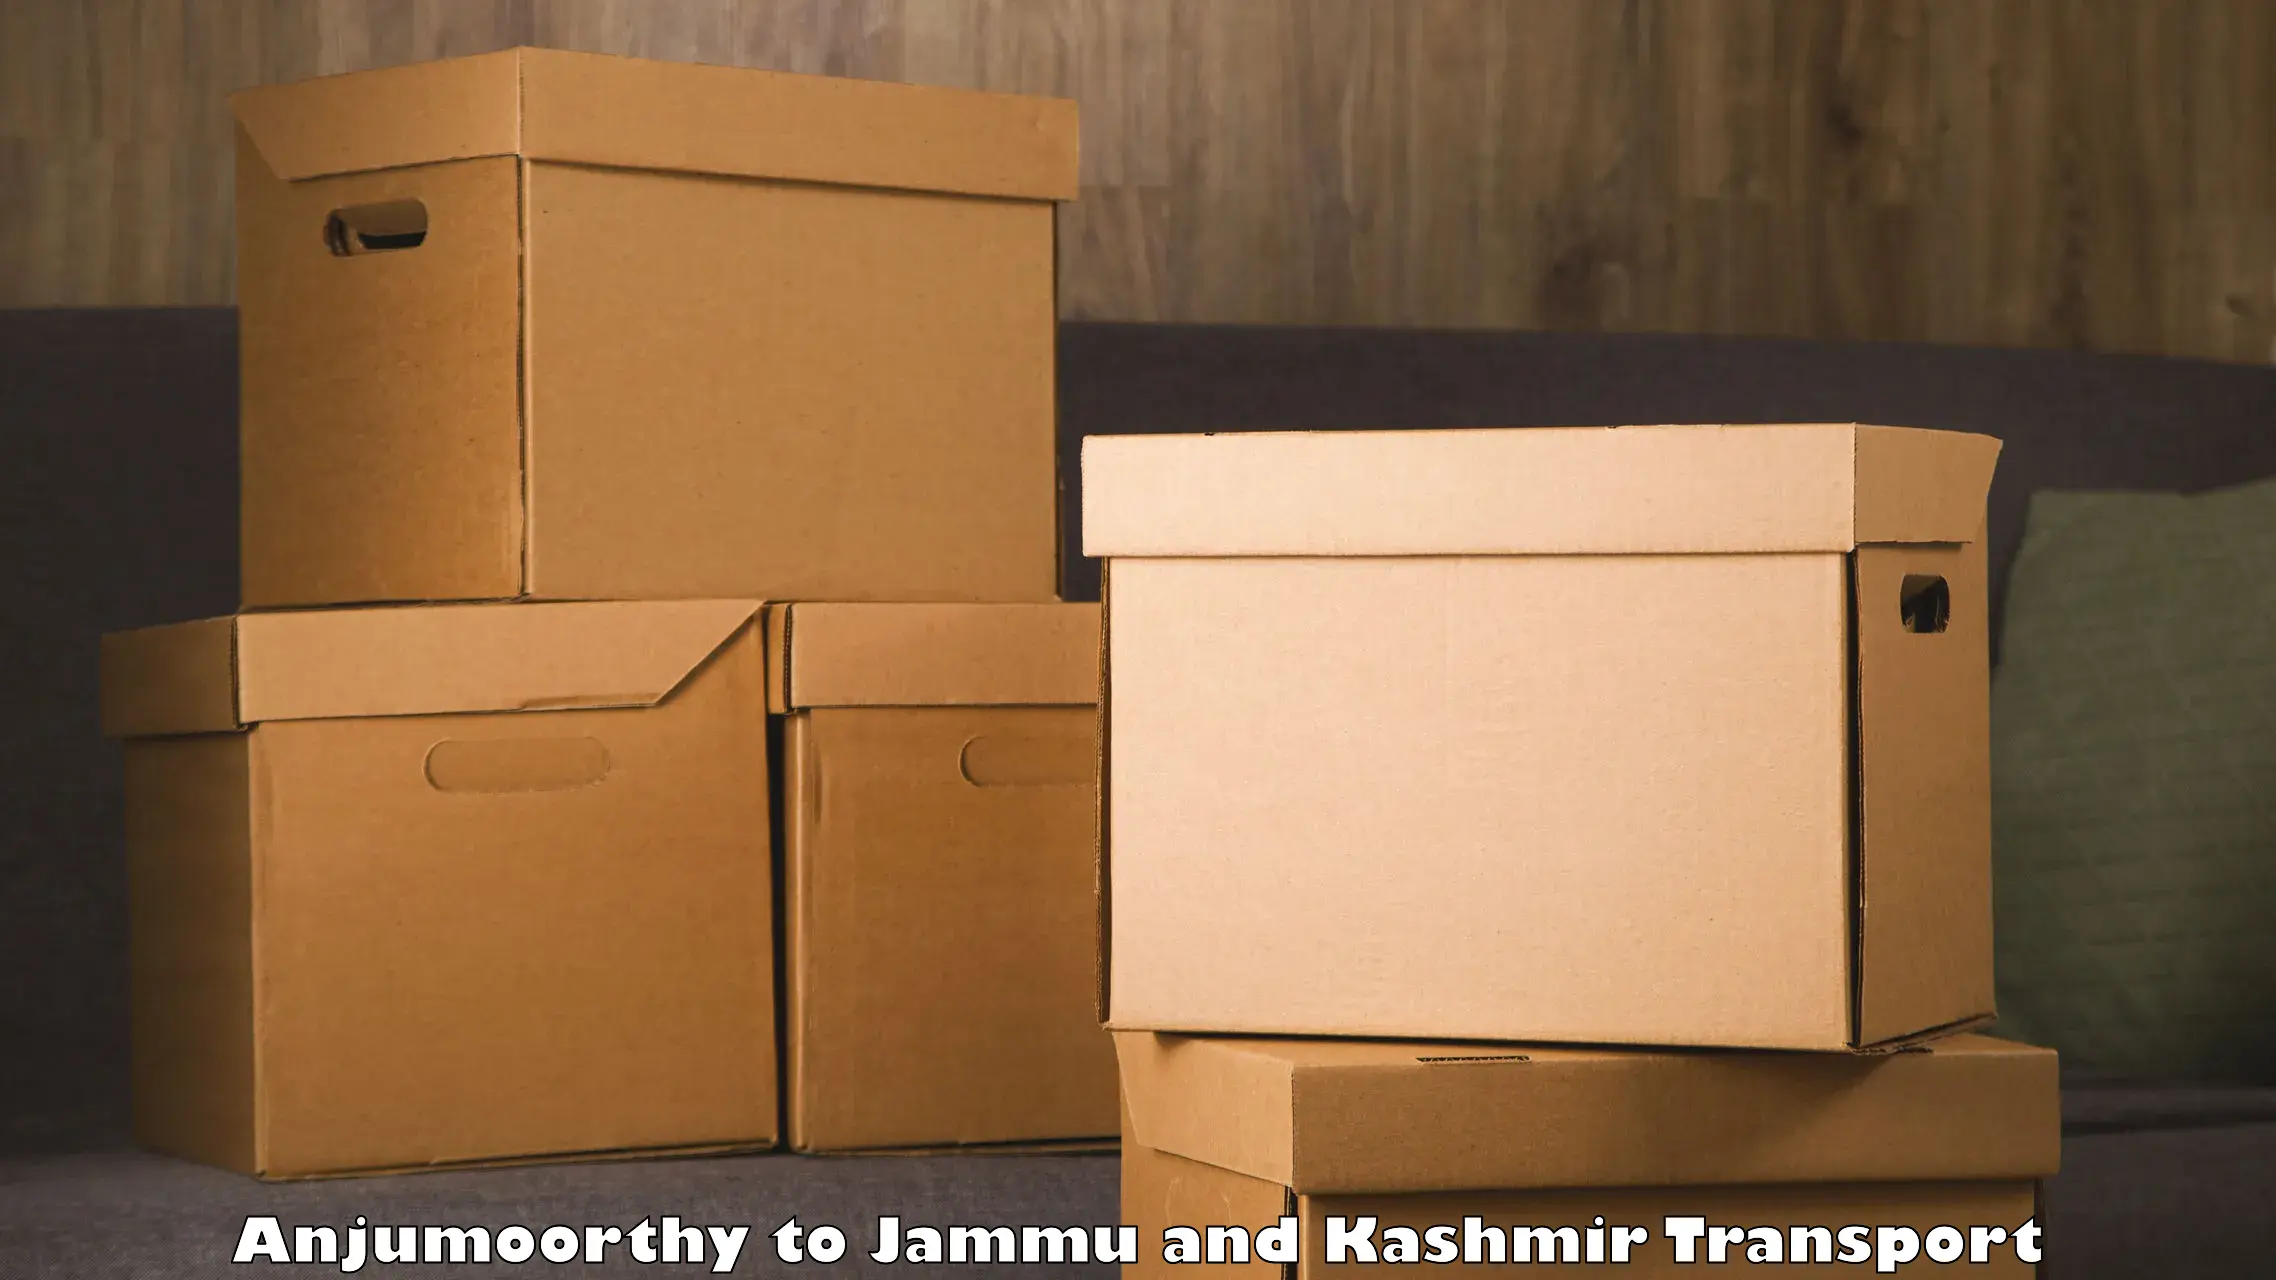 Air cargo transport services in Anjumoorthy to Jammu and Kashmir